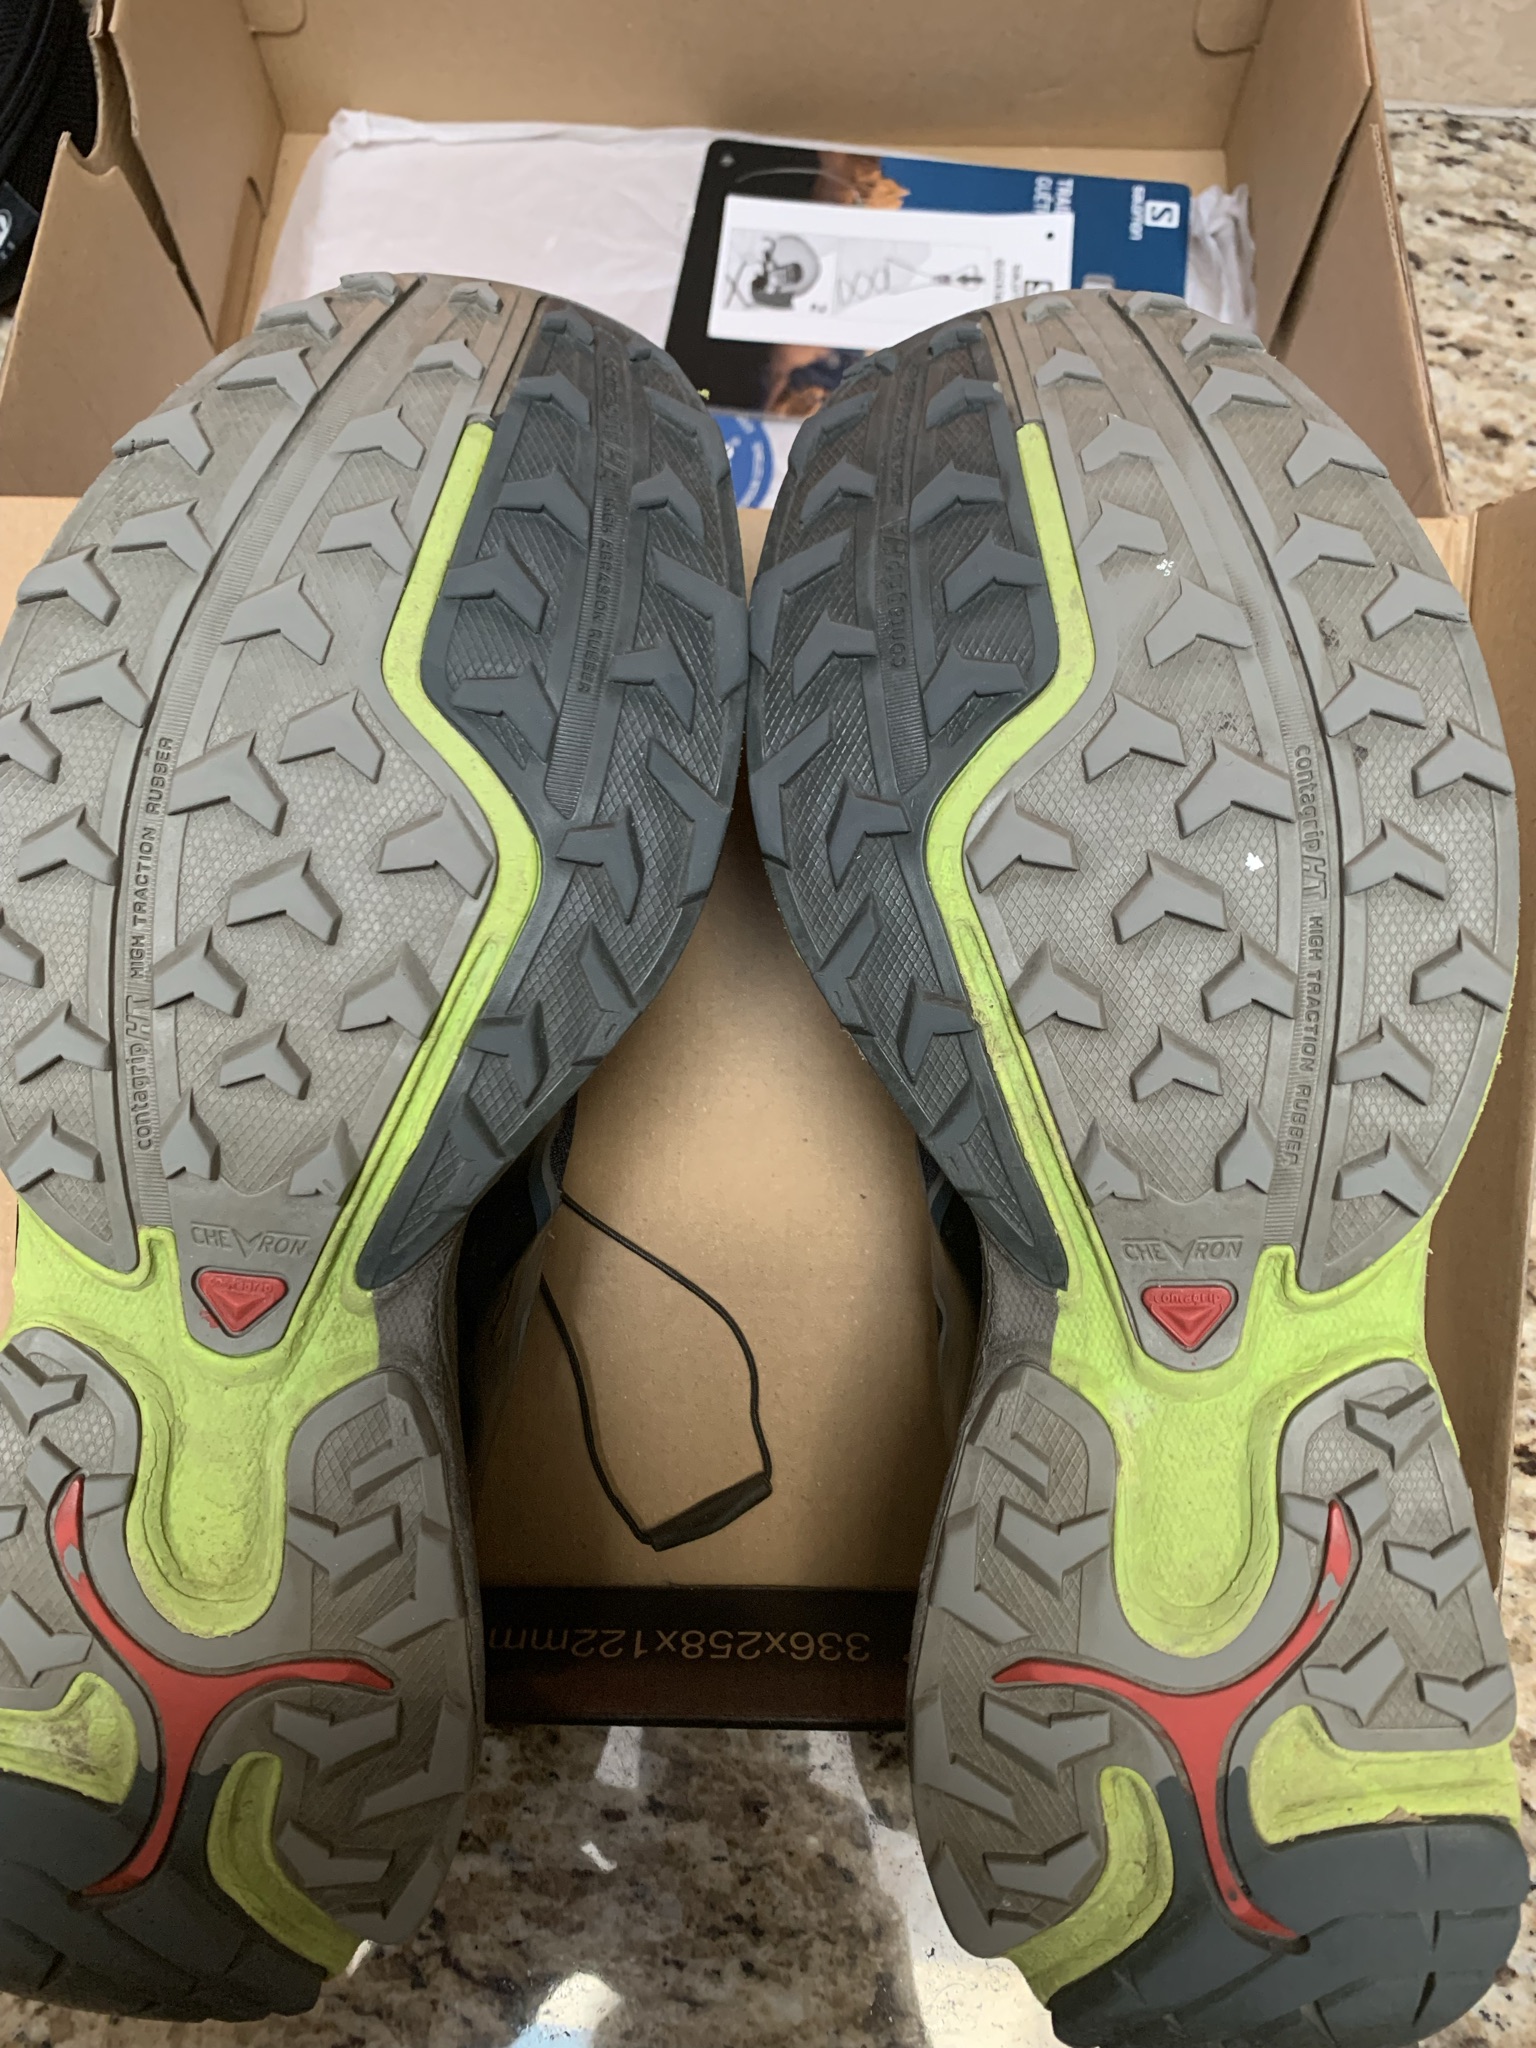 Solomon WingsPro trail runners/hikers sz 10.5 $30 + shipping ...